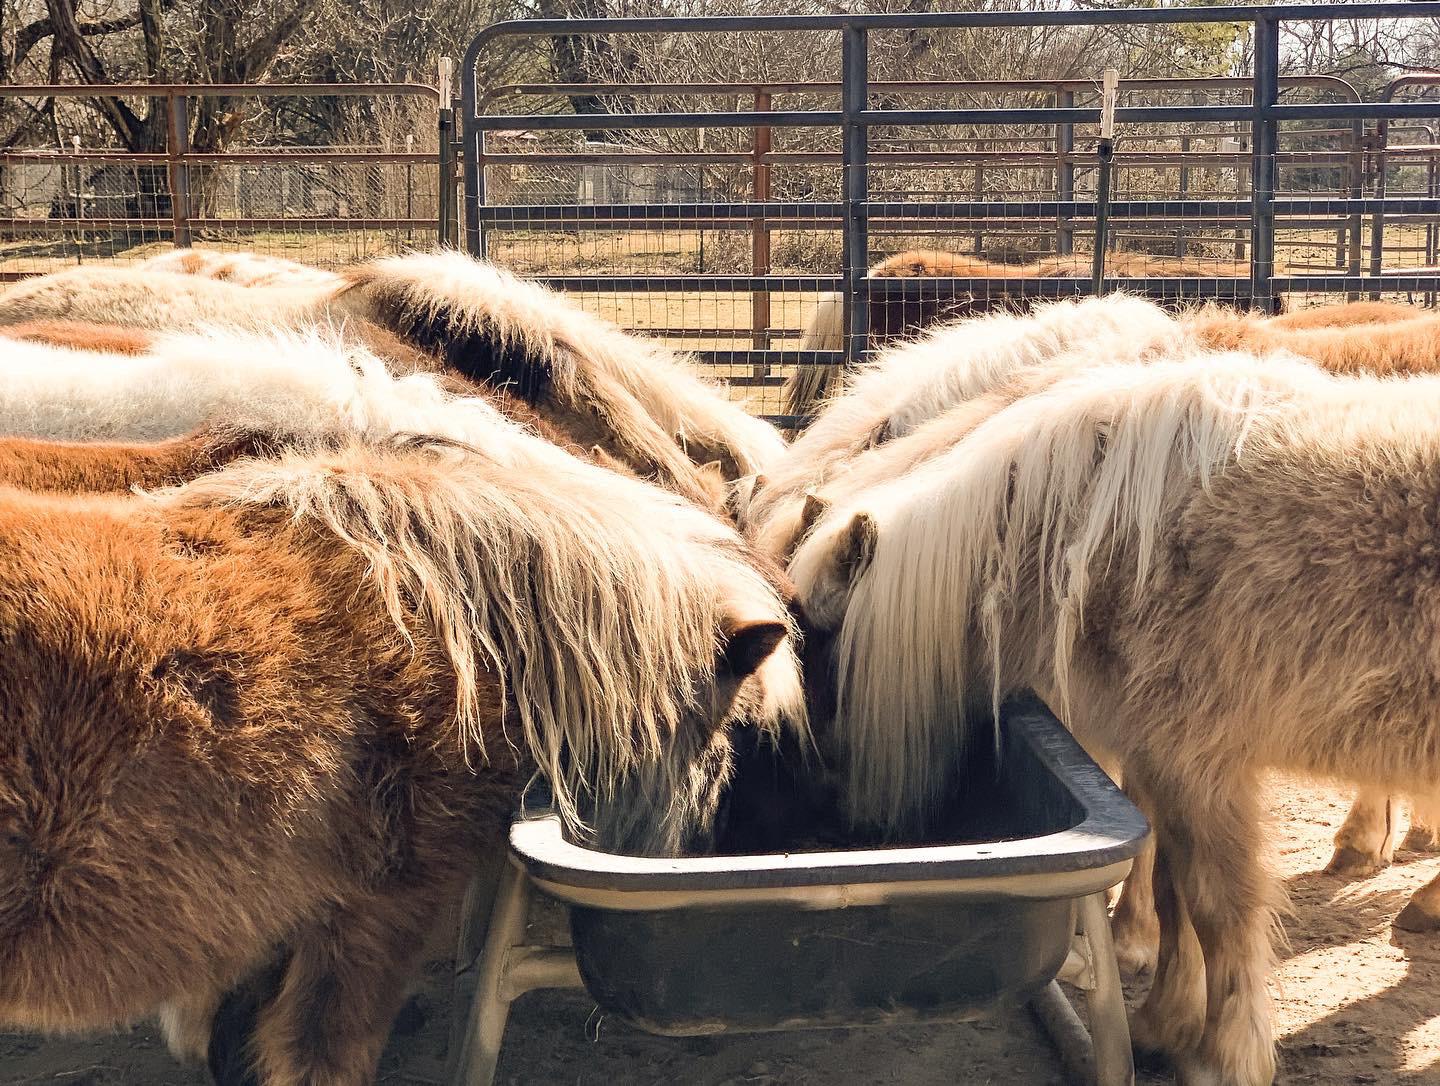 Miniature horses are actually bred to look just like tiny versions of a full sized horse and typically have the more refined features of a larger horse, compared to the stockier and larger yet still small pony.